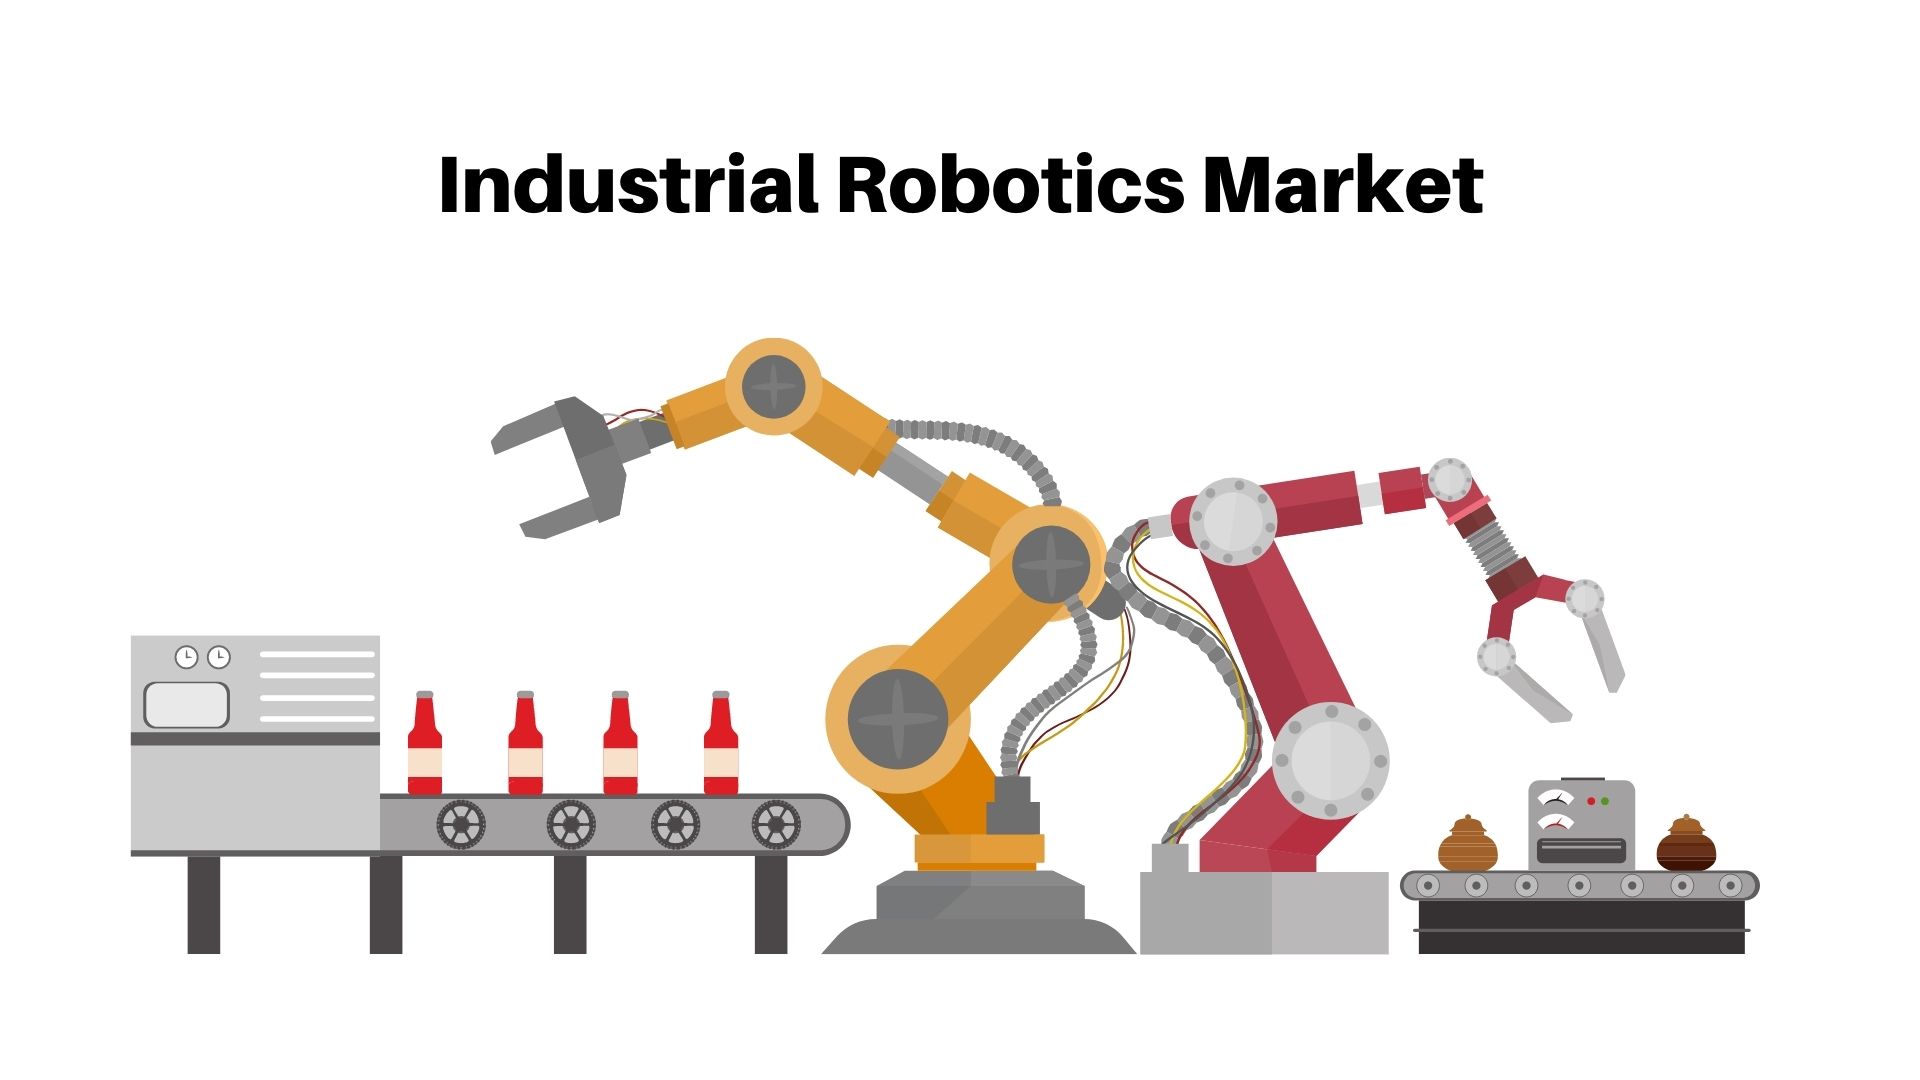 Industrial Robotics Market Share is set to increase by USD 109.5 billion by 2032